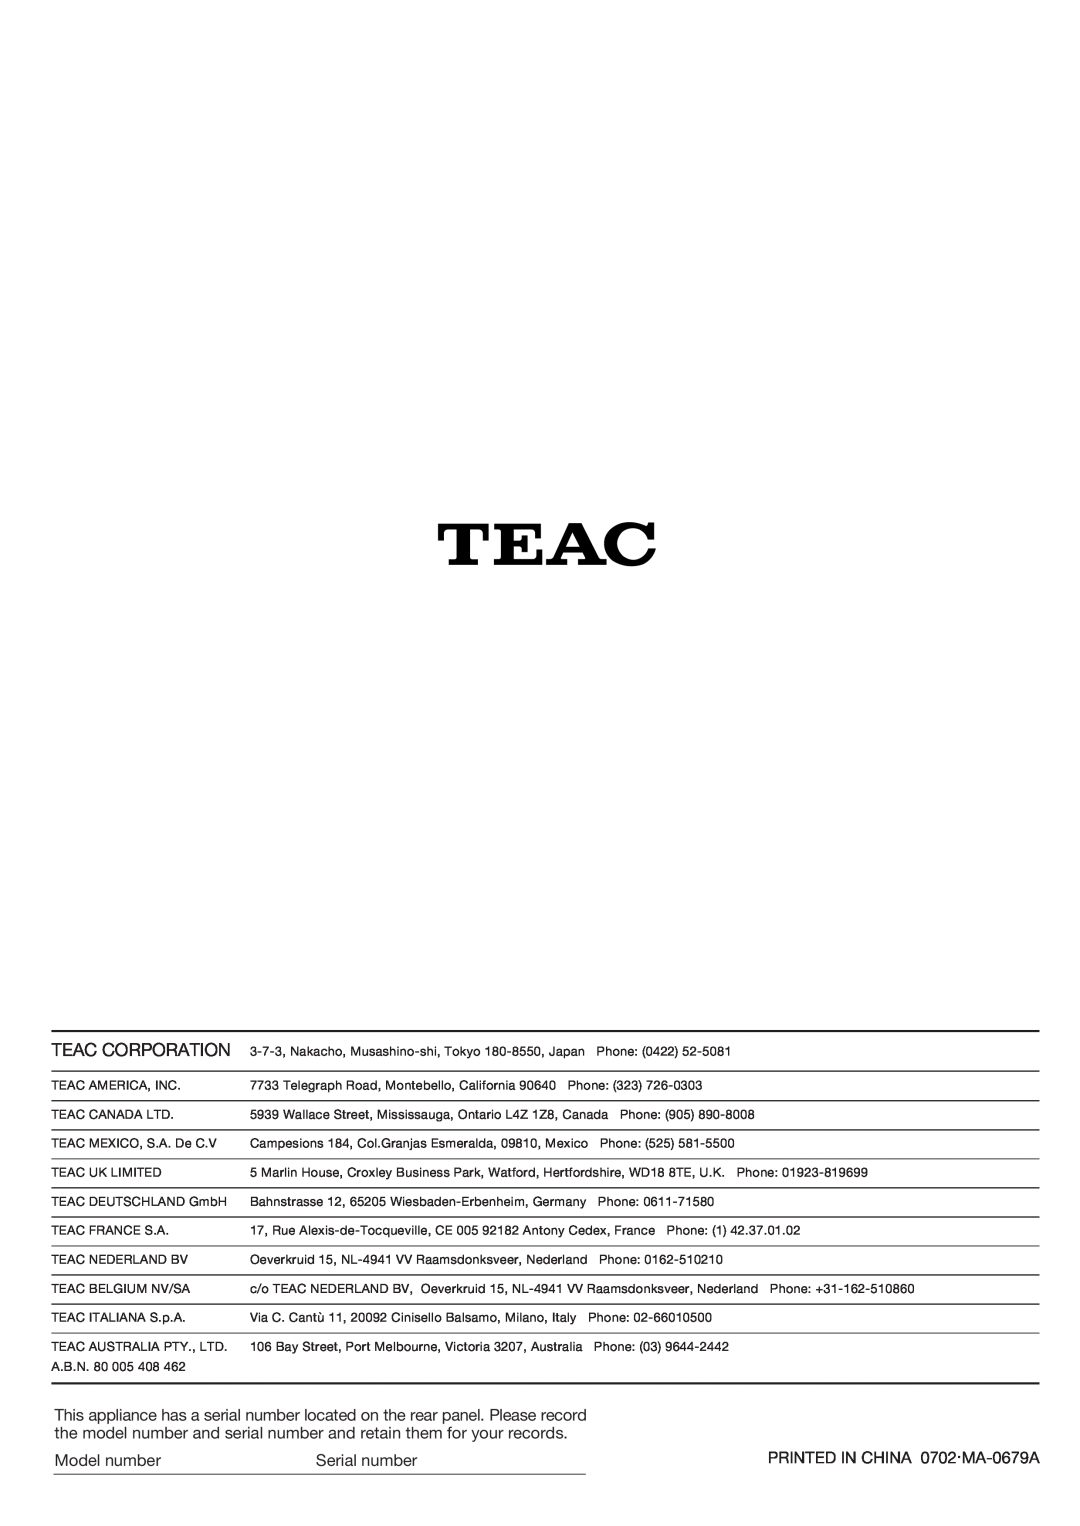 Teac SL-D90 Teac Corporation, the model number and serial number and retain them for your records, Model number 